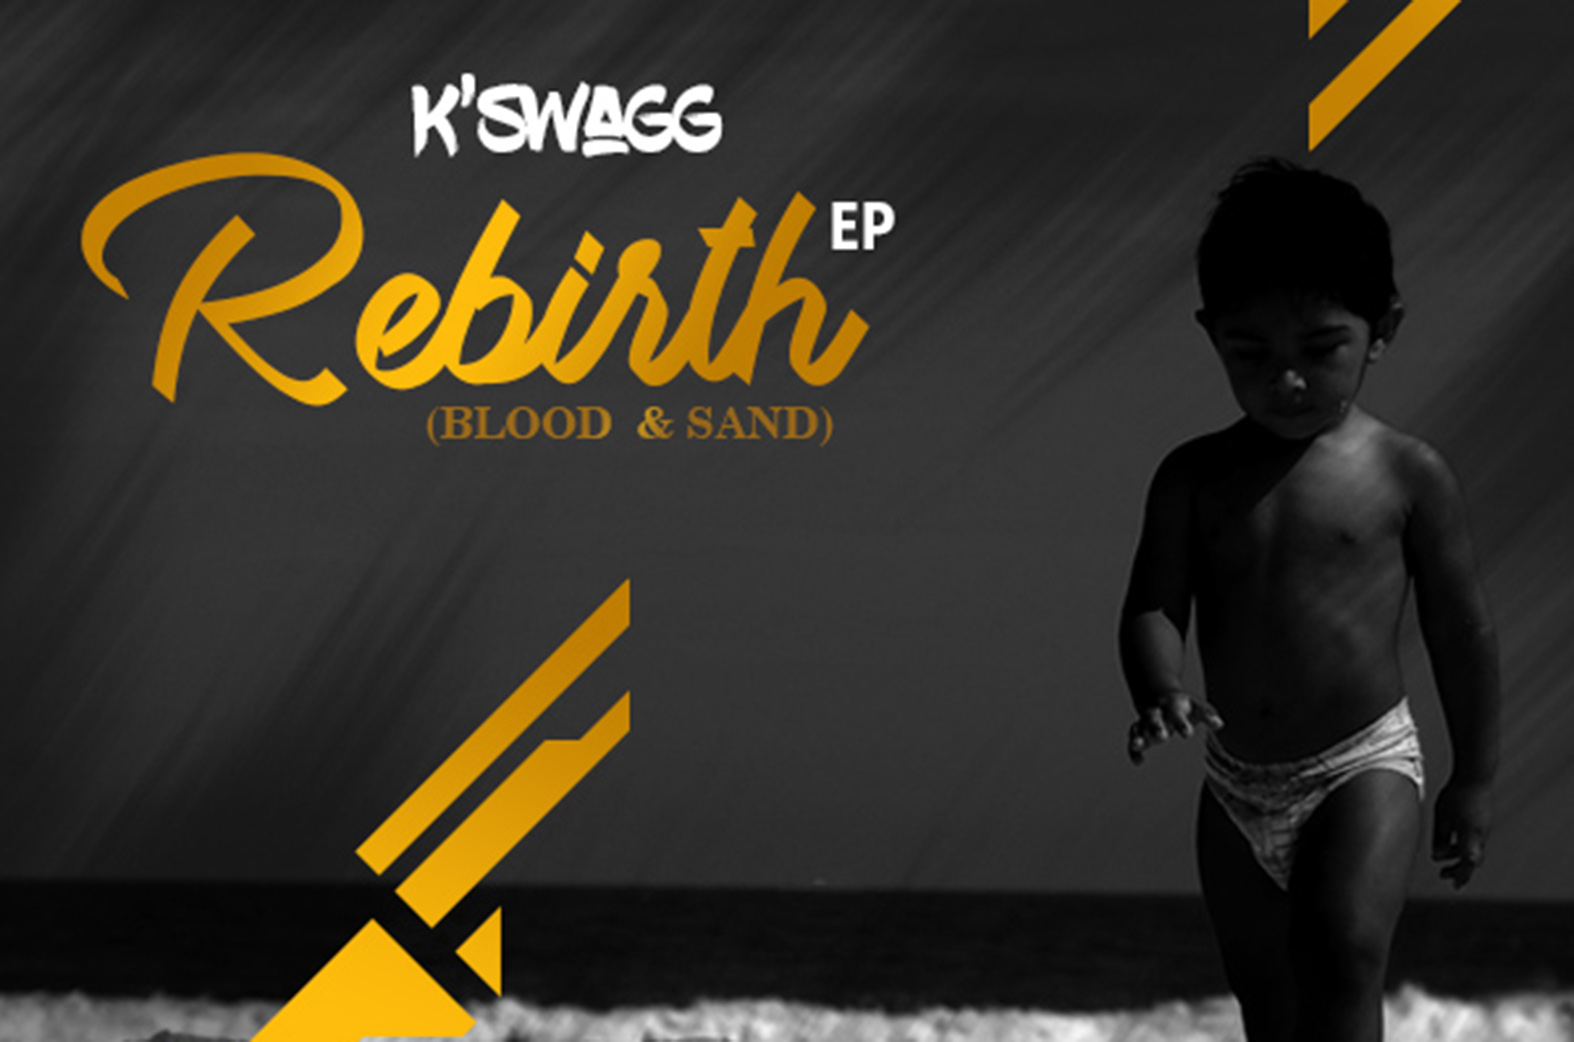 K'Swagg releases short film ahead of The Rebirth EP